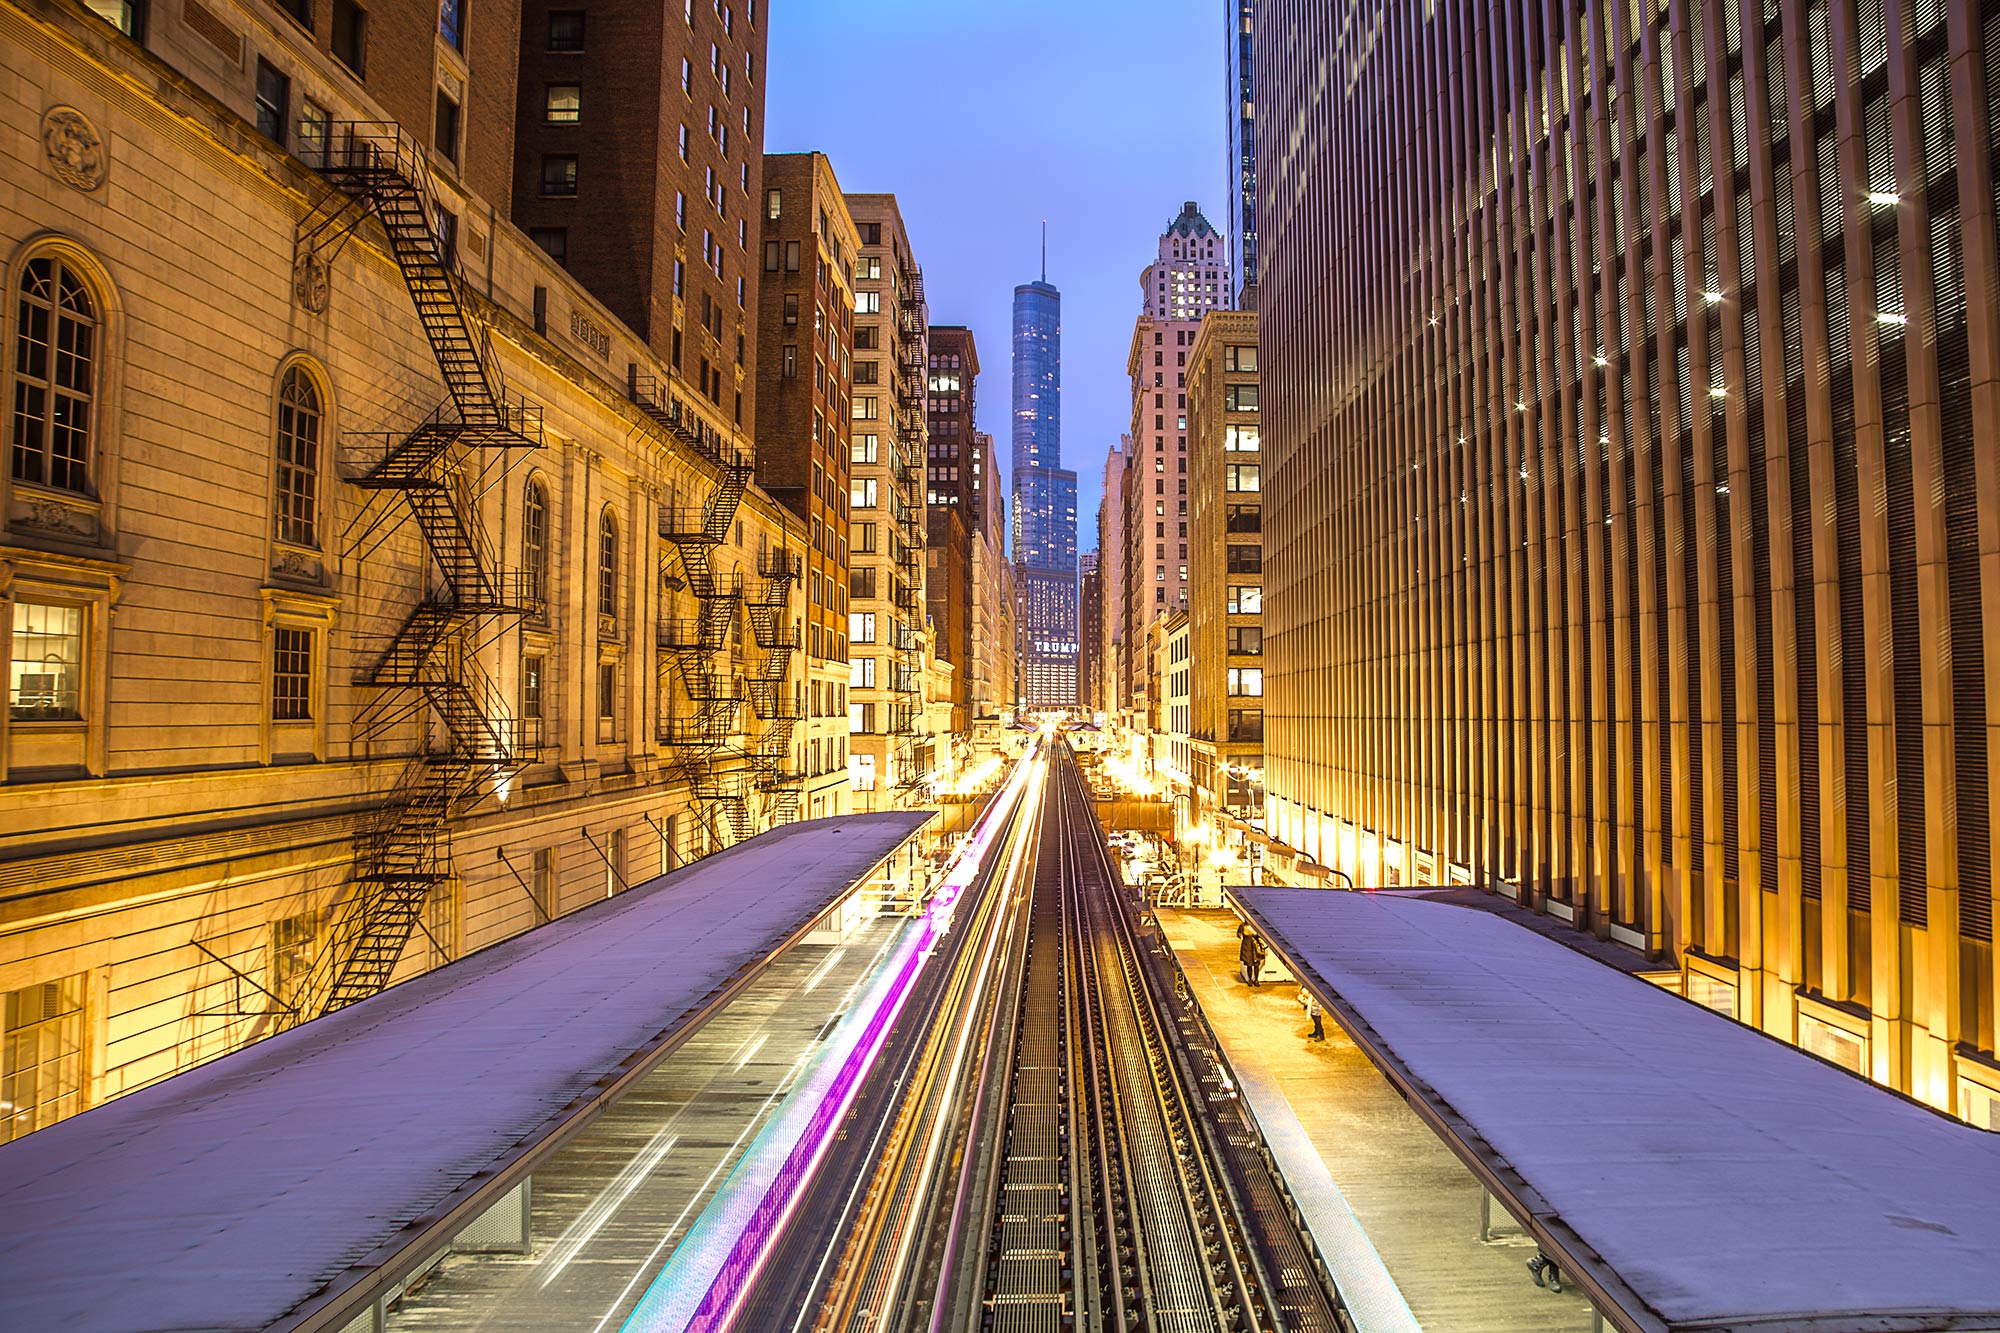 Looking north over the L tracks on Wabash Ave in the Chicago Loop